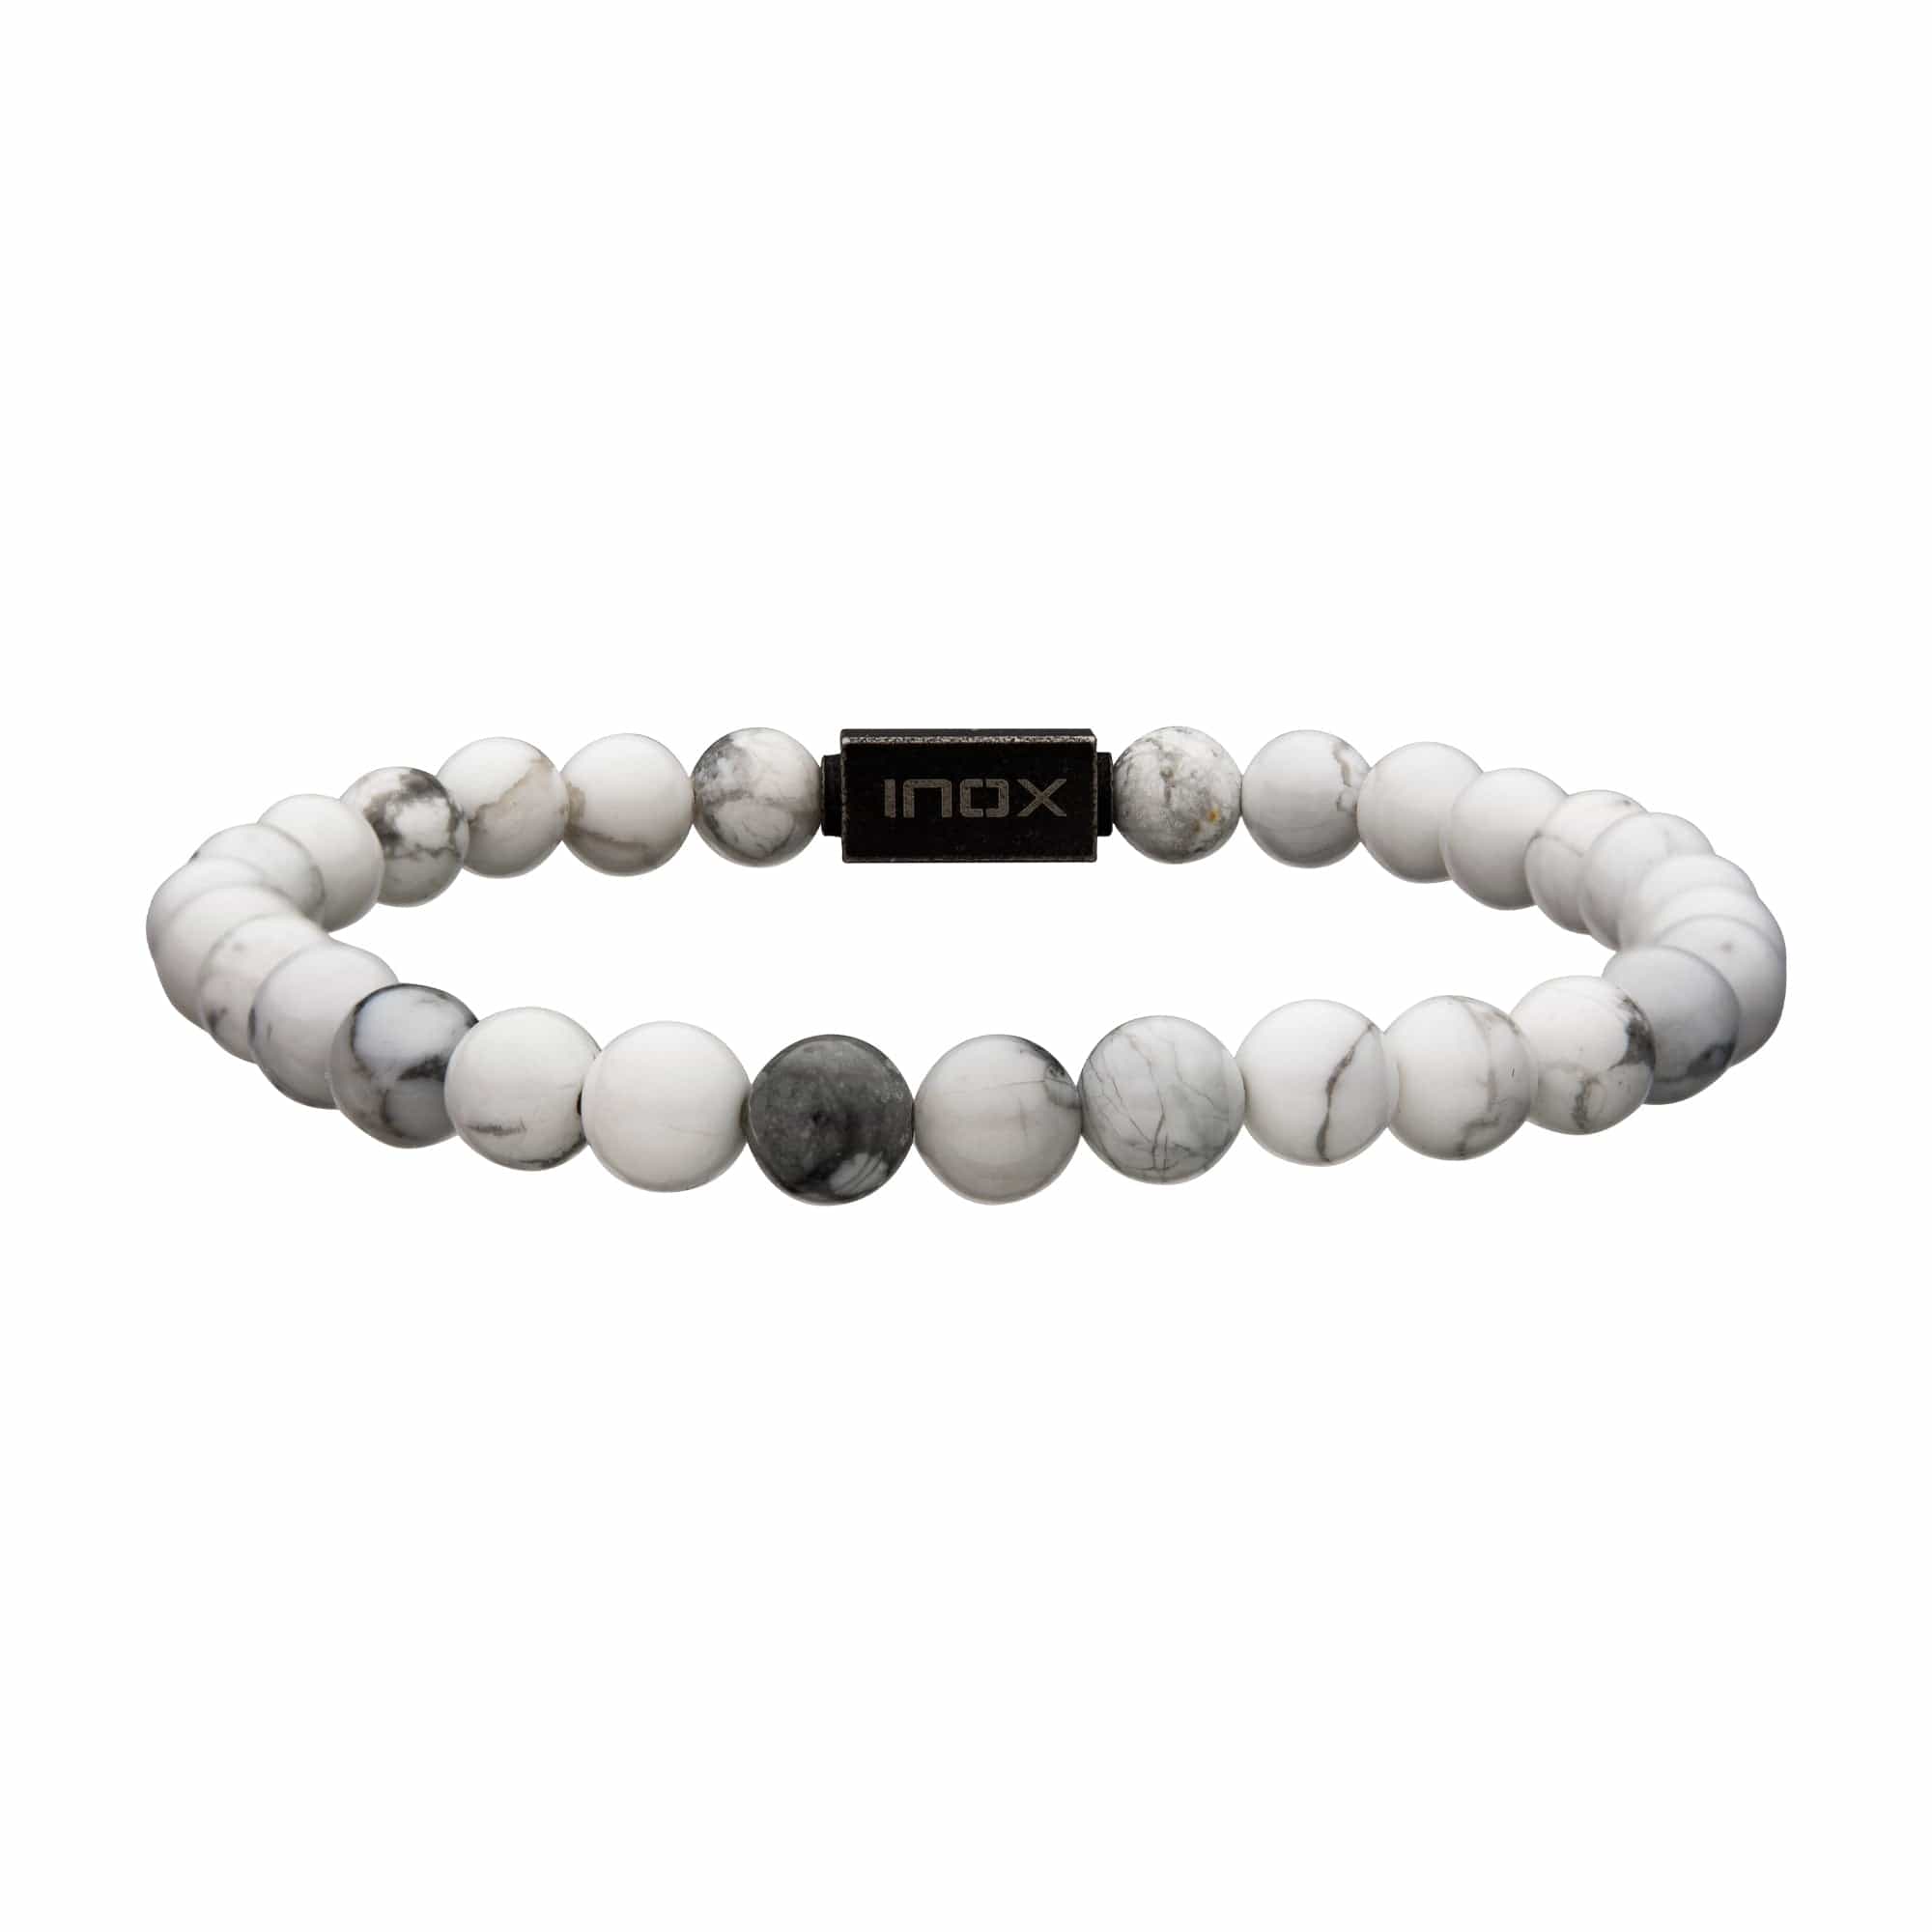 INOX JEWELRY Bracelets Antiqued Silver Tone Stainless Steel Stonehenge Collection 6mm White Howlite Stretch Bead Bracelet BRELWH